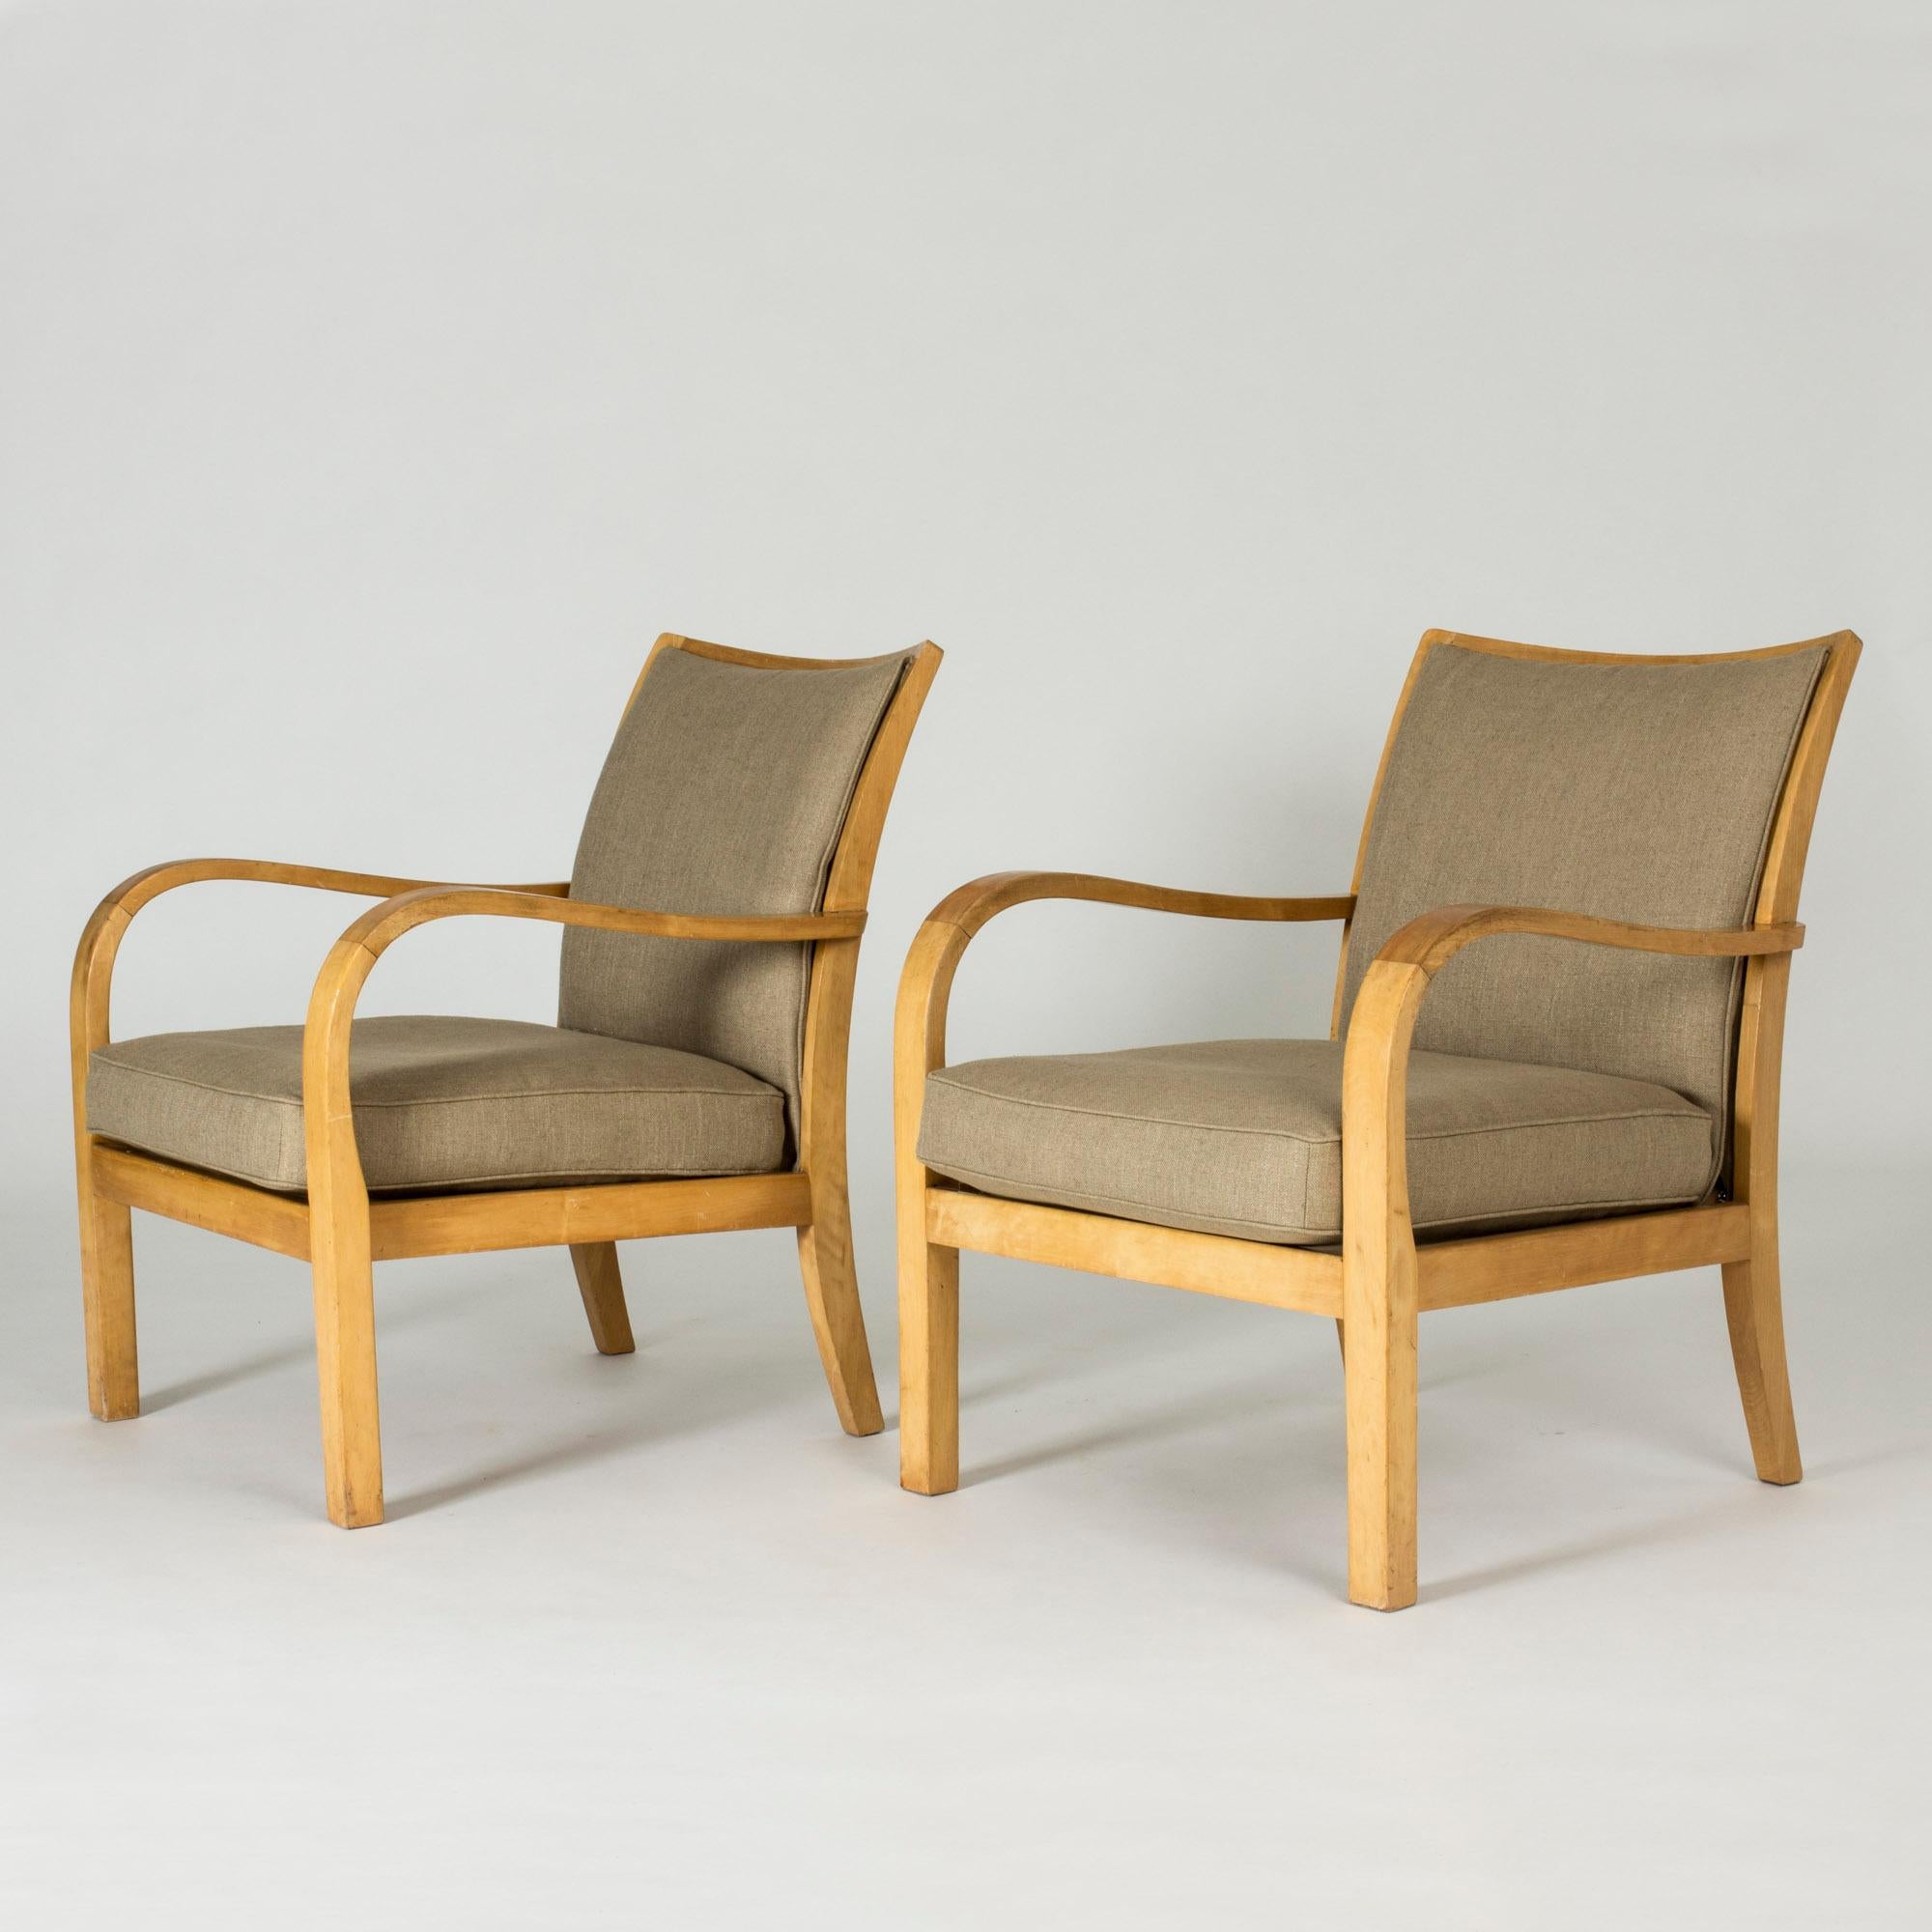 Scandinavian Modern Pair of Functionalist Birch and Linen Lounge Chairs by Axel Larsson for Bodafors For Sale